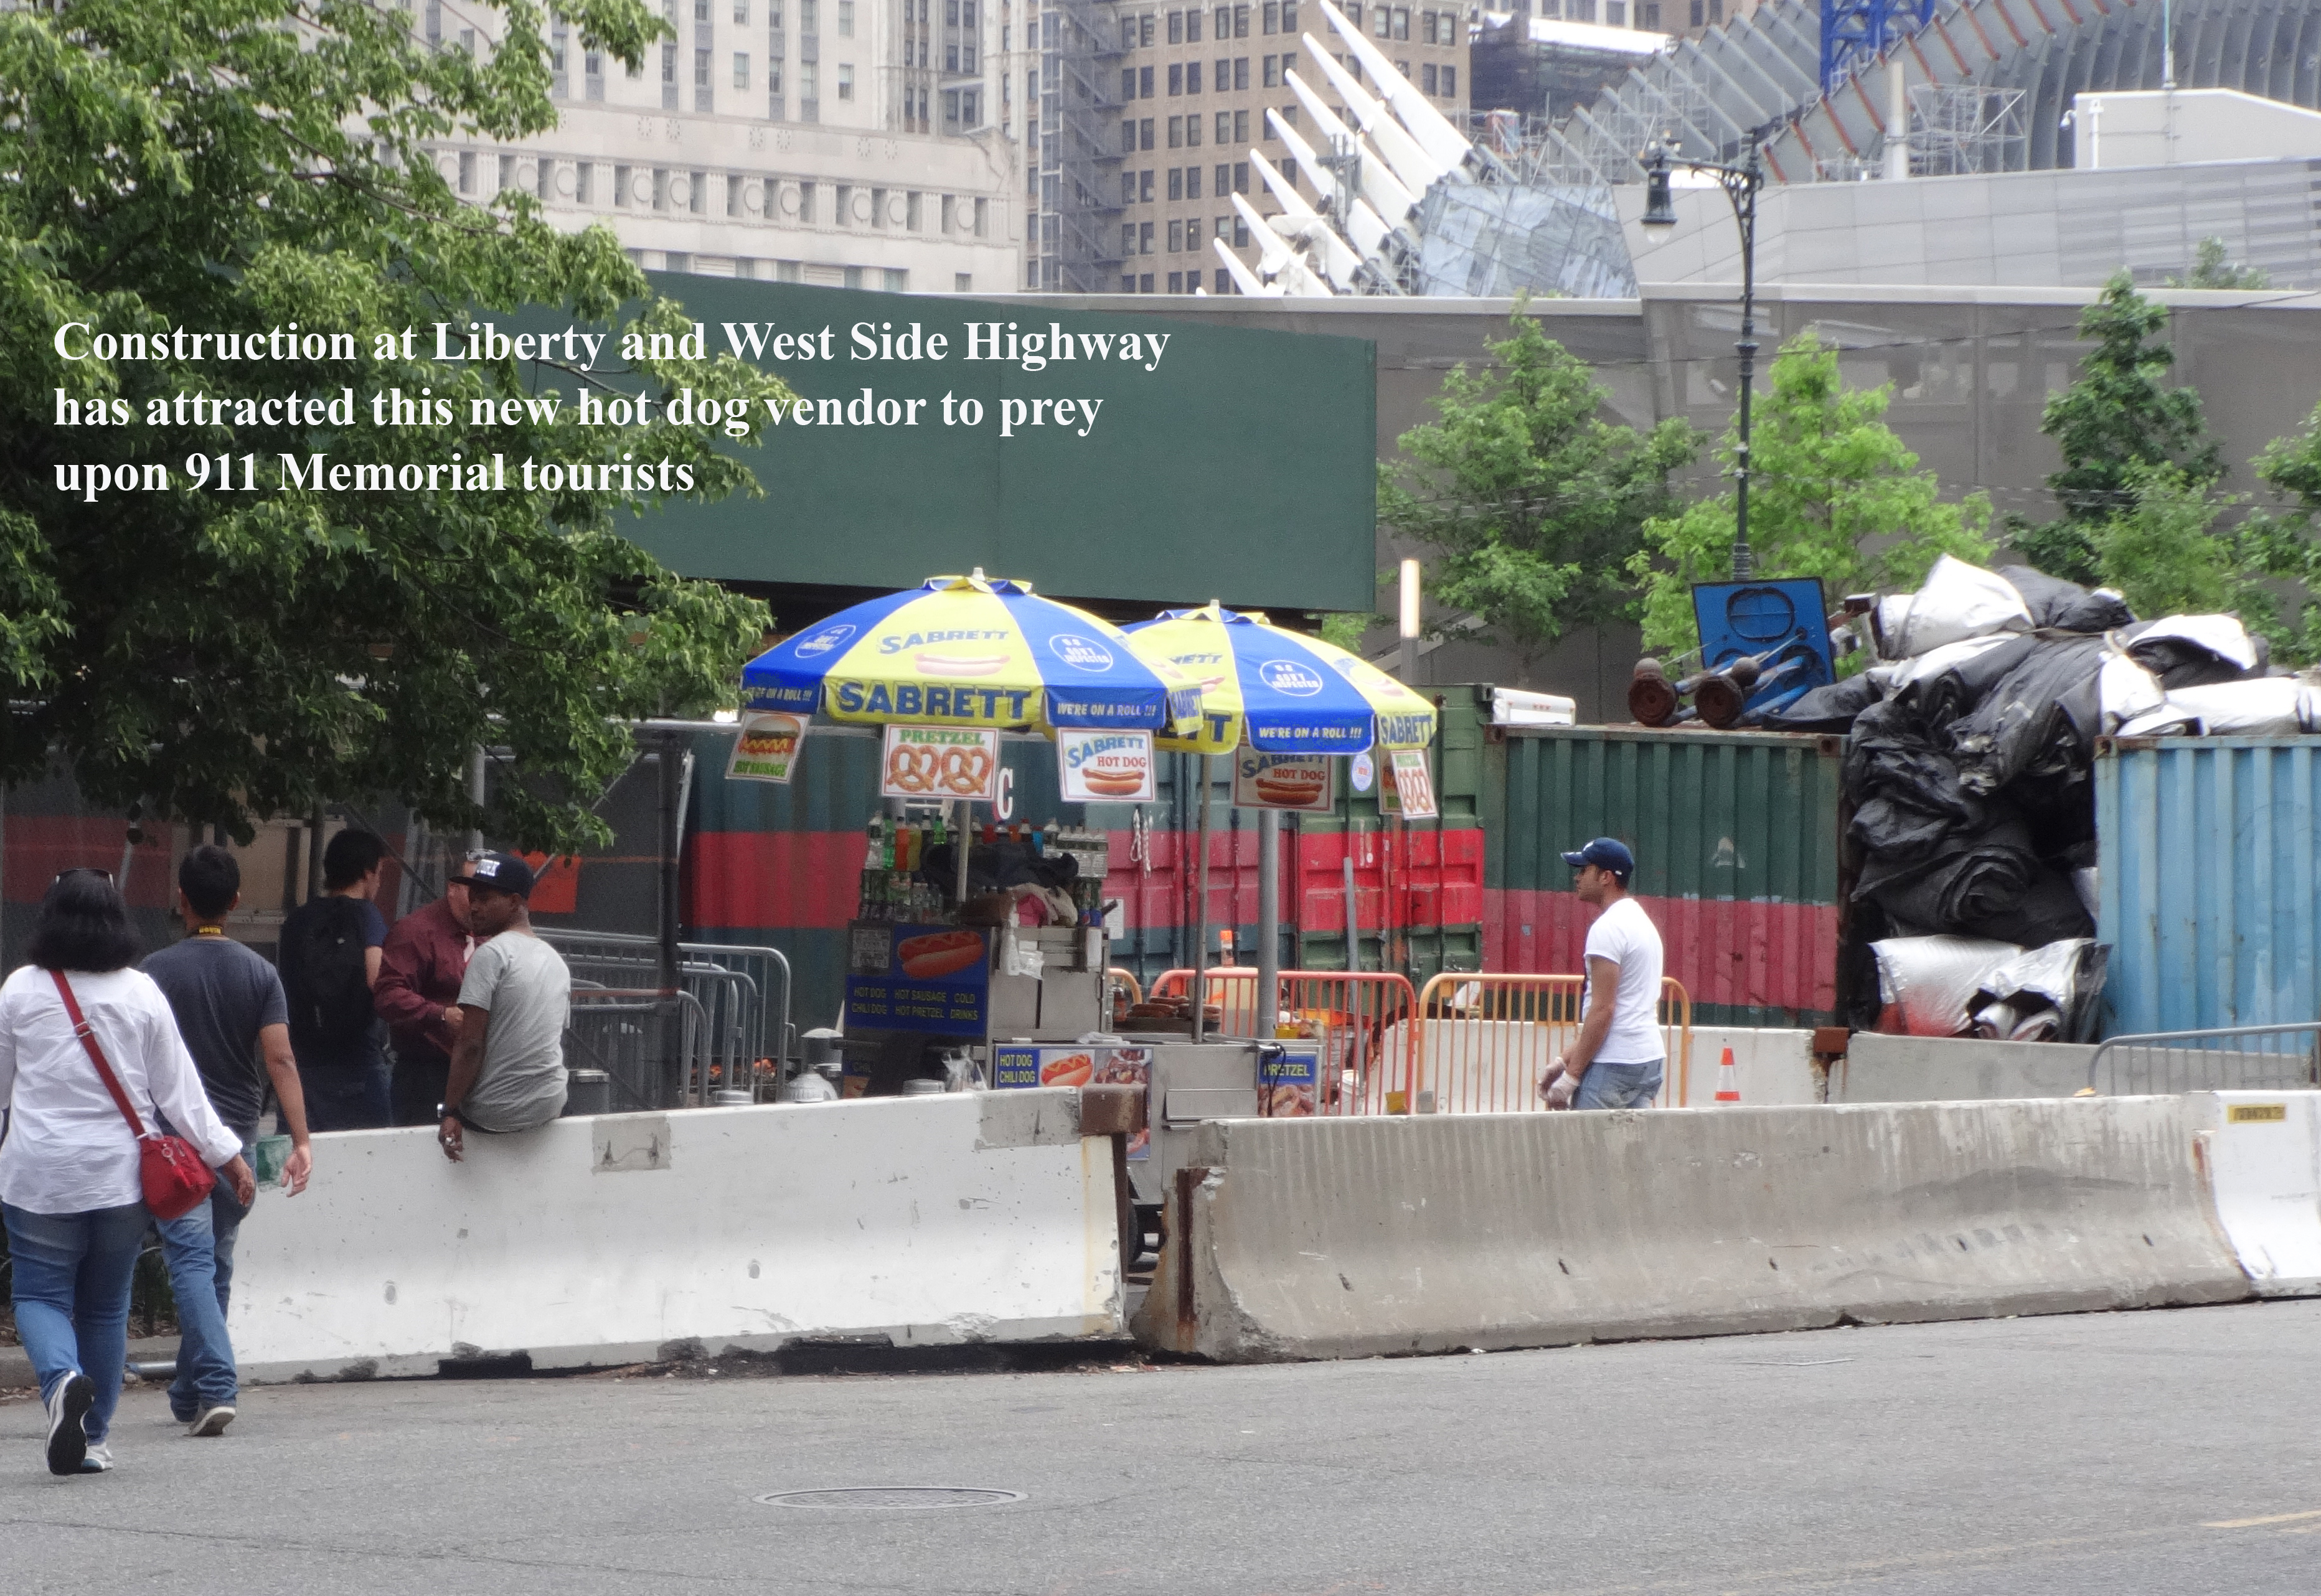 Hot dog vendor at Liberty and West Side Highway